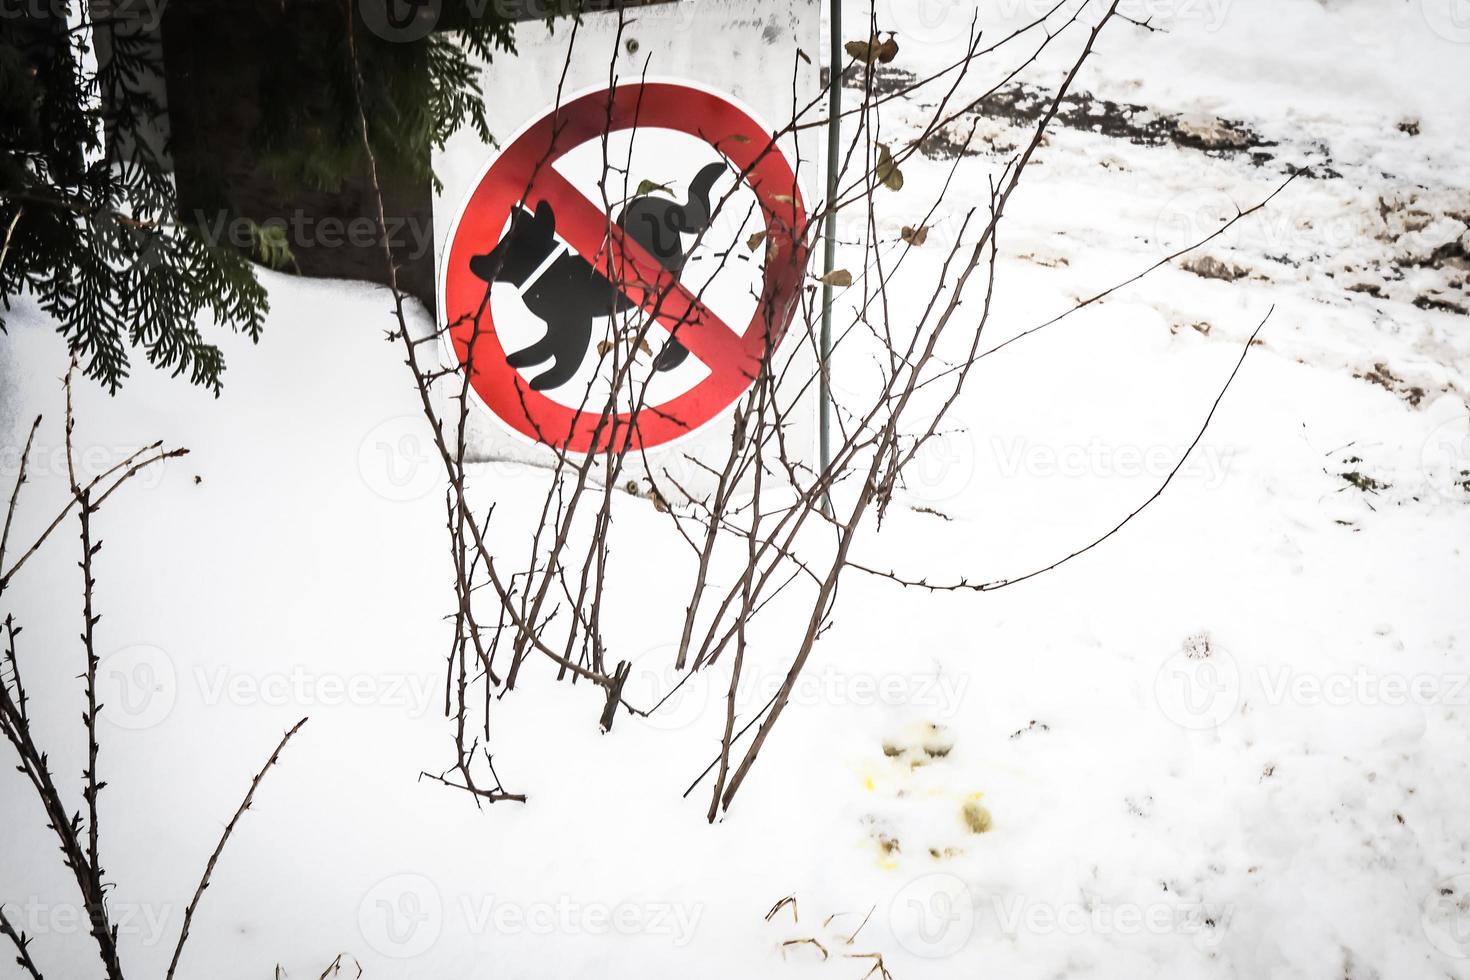 No pee zone square dog sign with red crossed circle on snow lawn background in winter photo